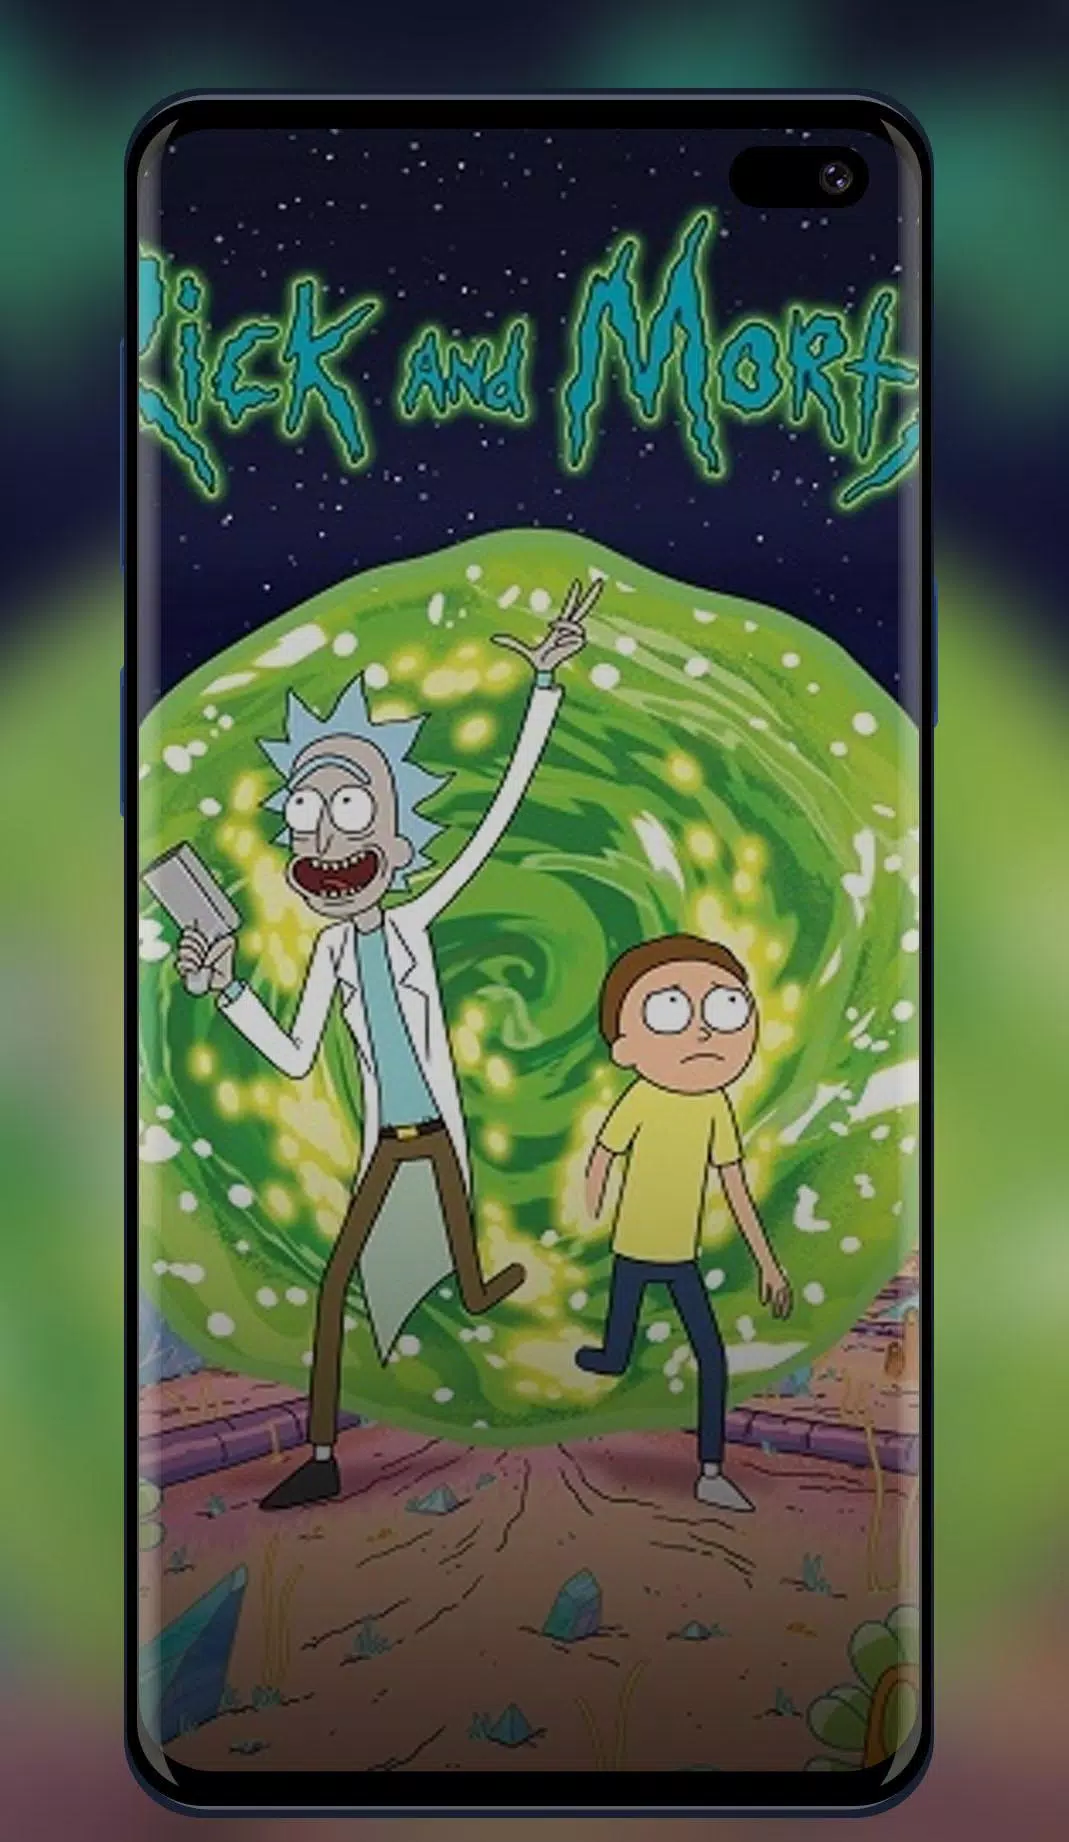 Rick and Morty Archives - Live Desktop Wallpapers